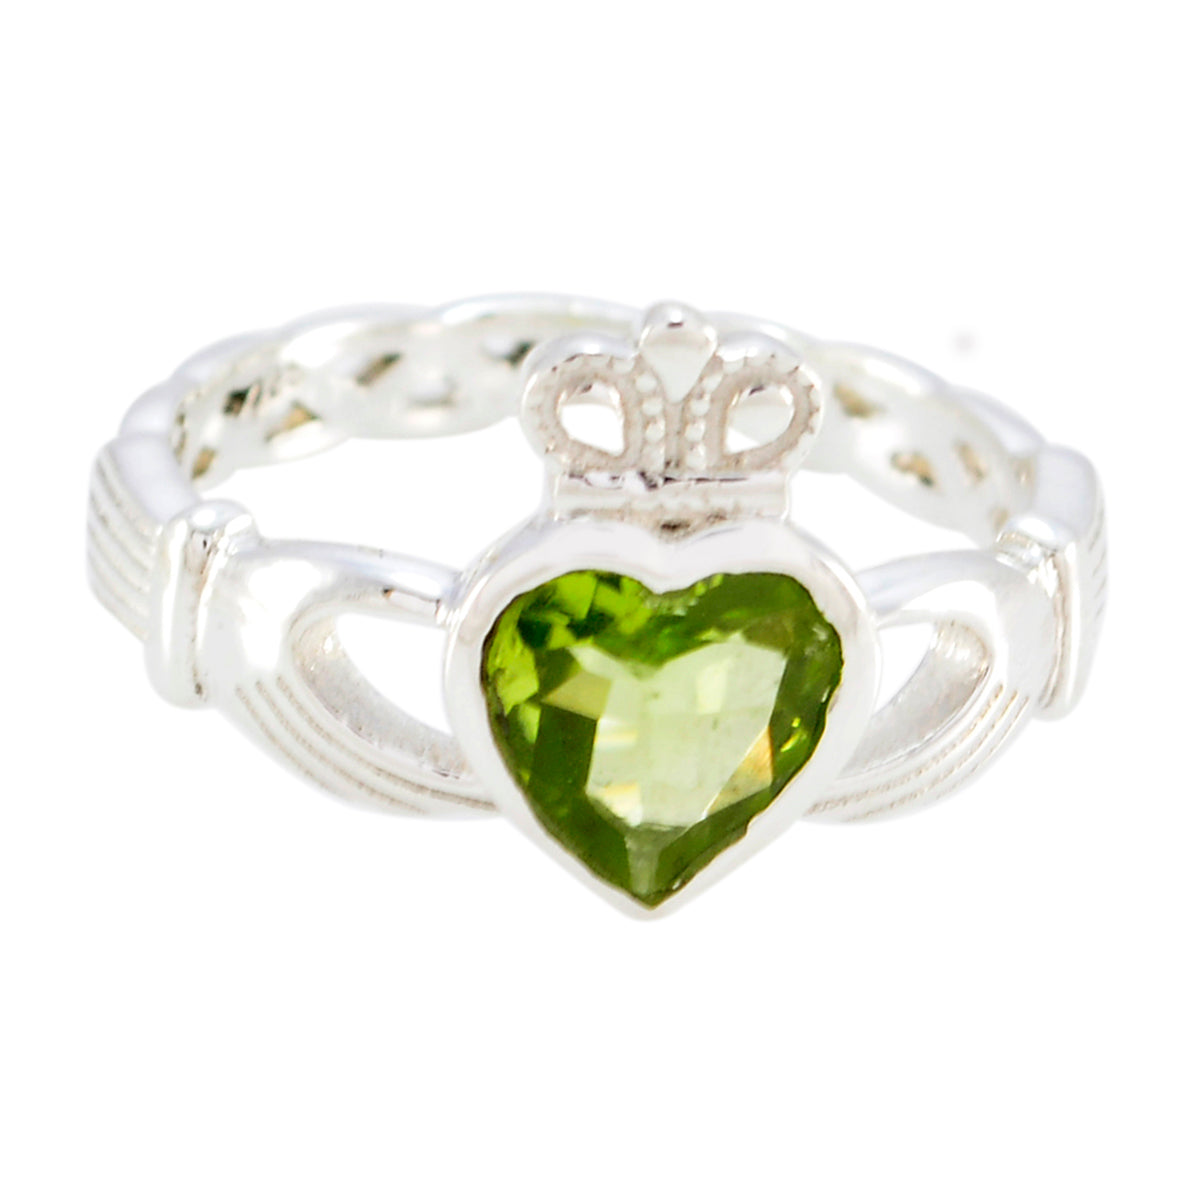 Magnificent Gems Peridot Solid Silver Rings Gift For Black Friday